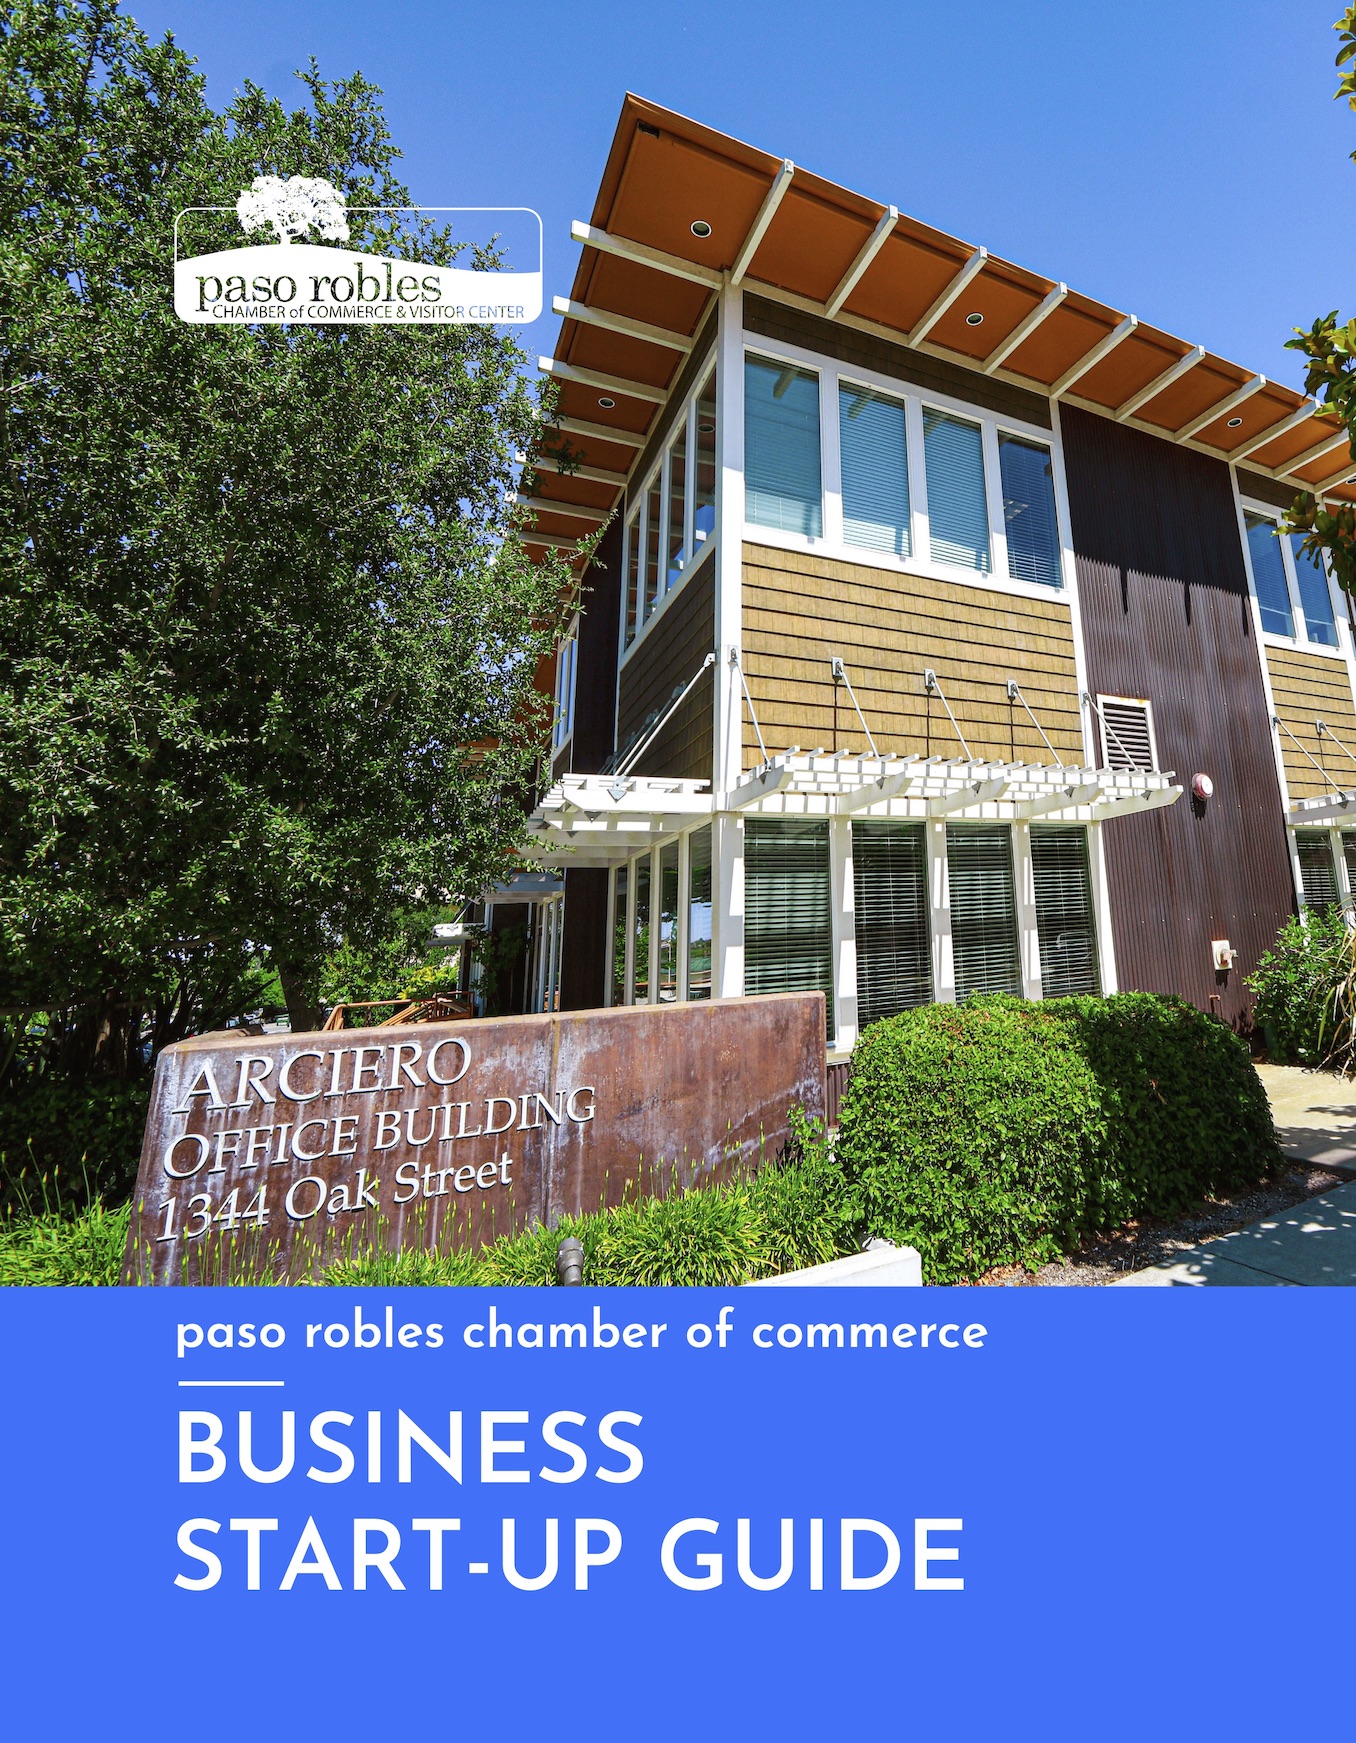 Business Start-Up Guide for paso robles businesses